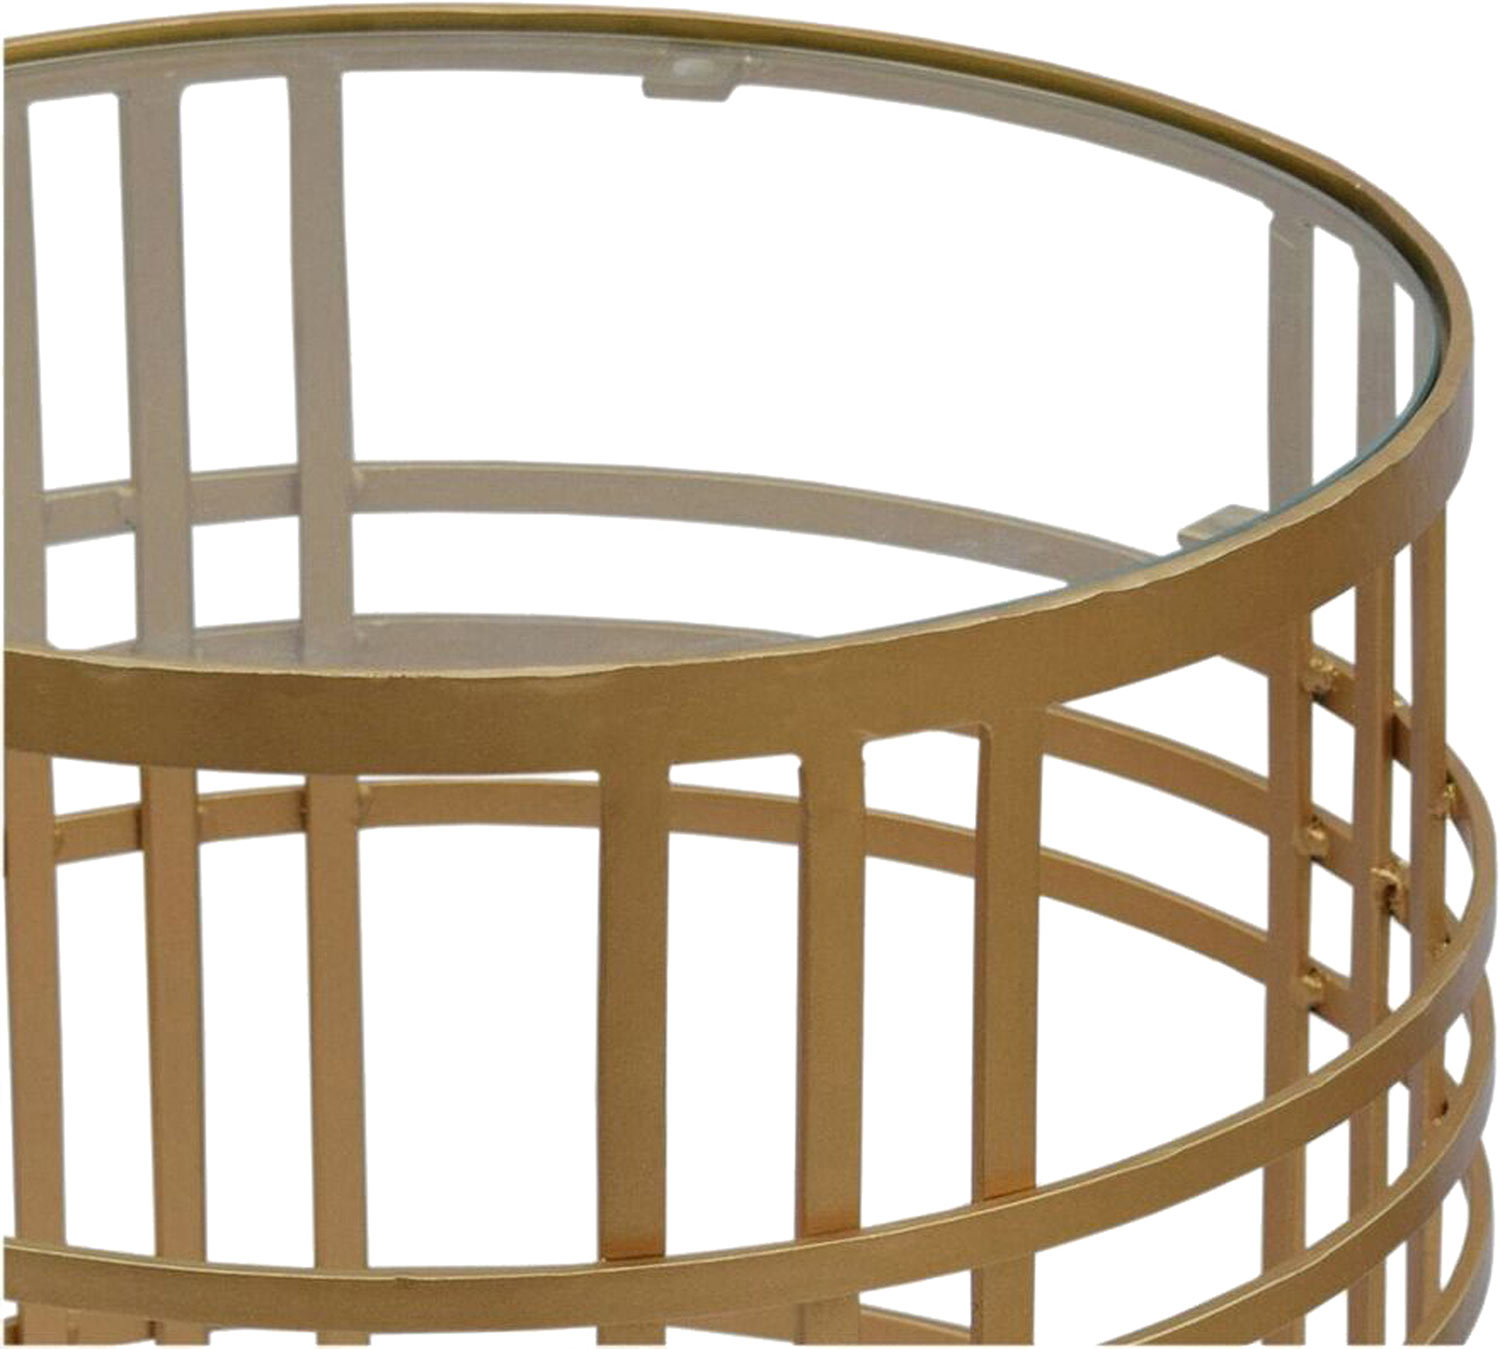 Ren-Wil Darvin Accent Table - Brass